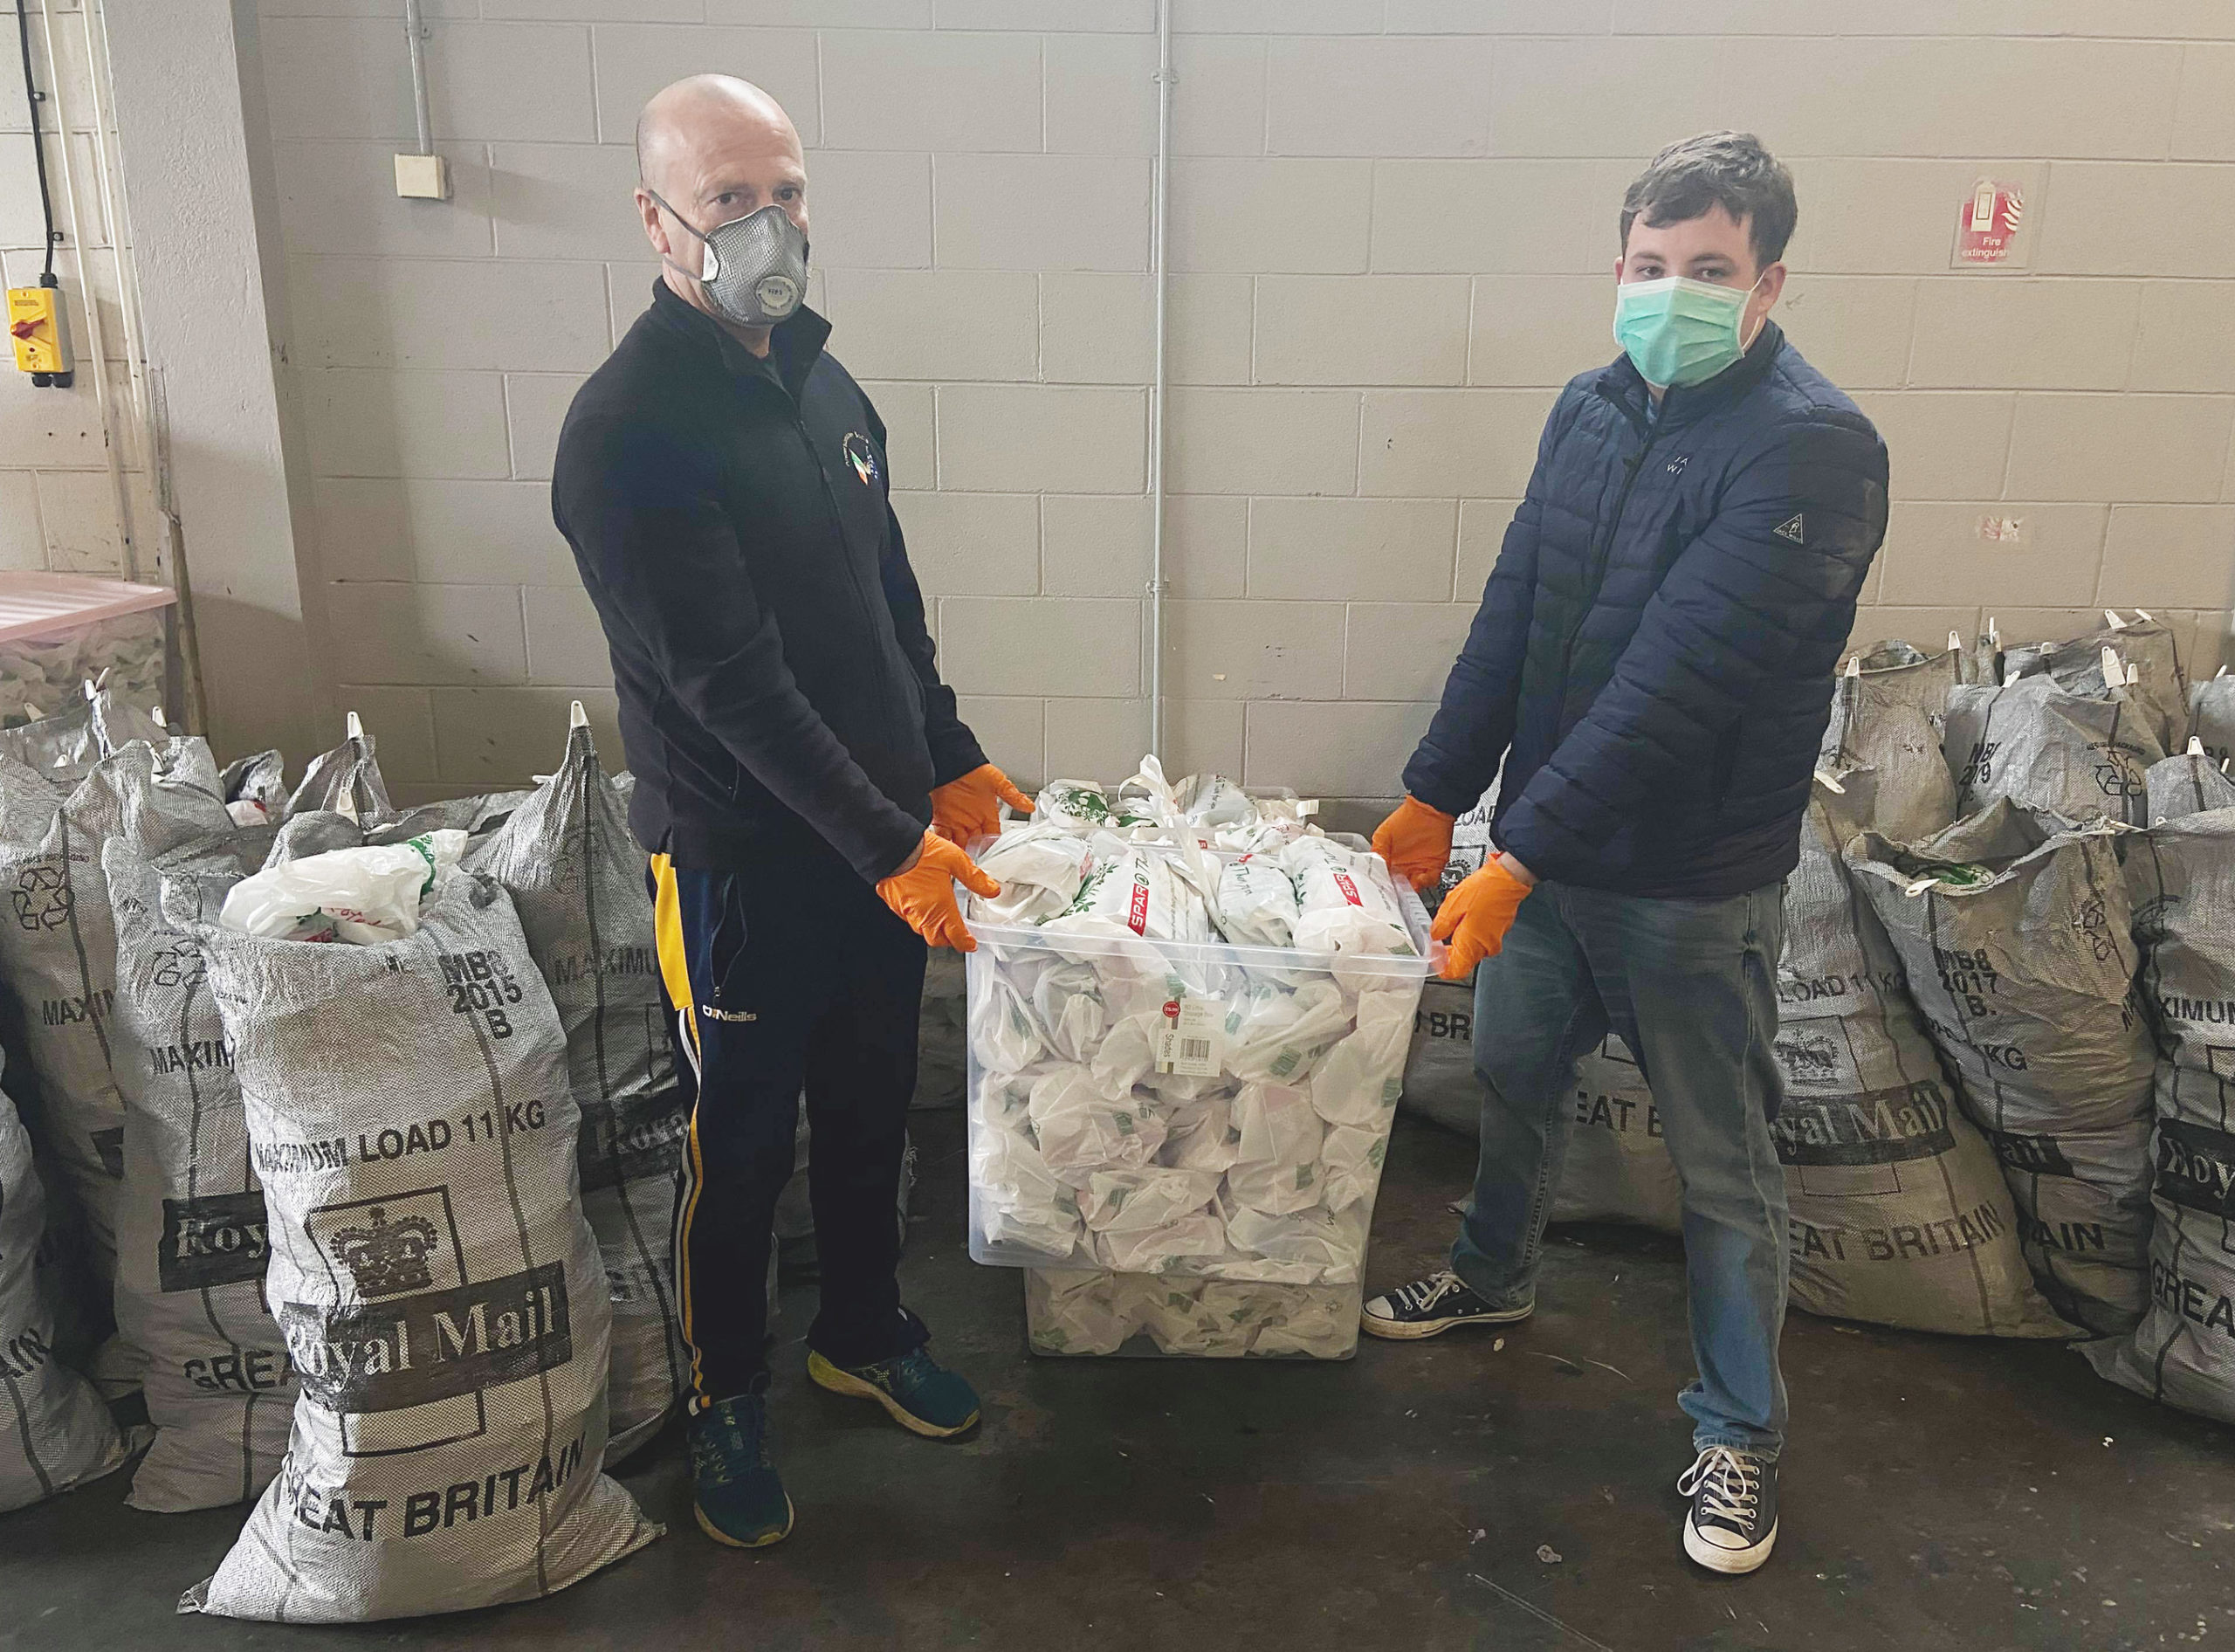 Shot-in-the-arm to relief efforts of Andersonstown Social Club